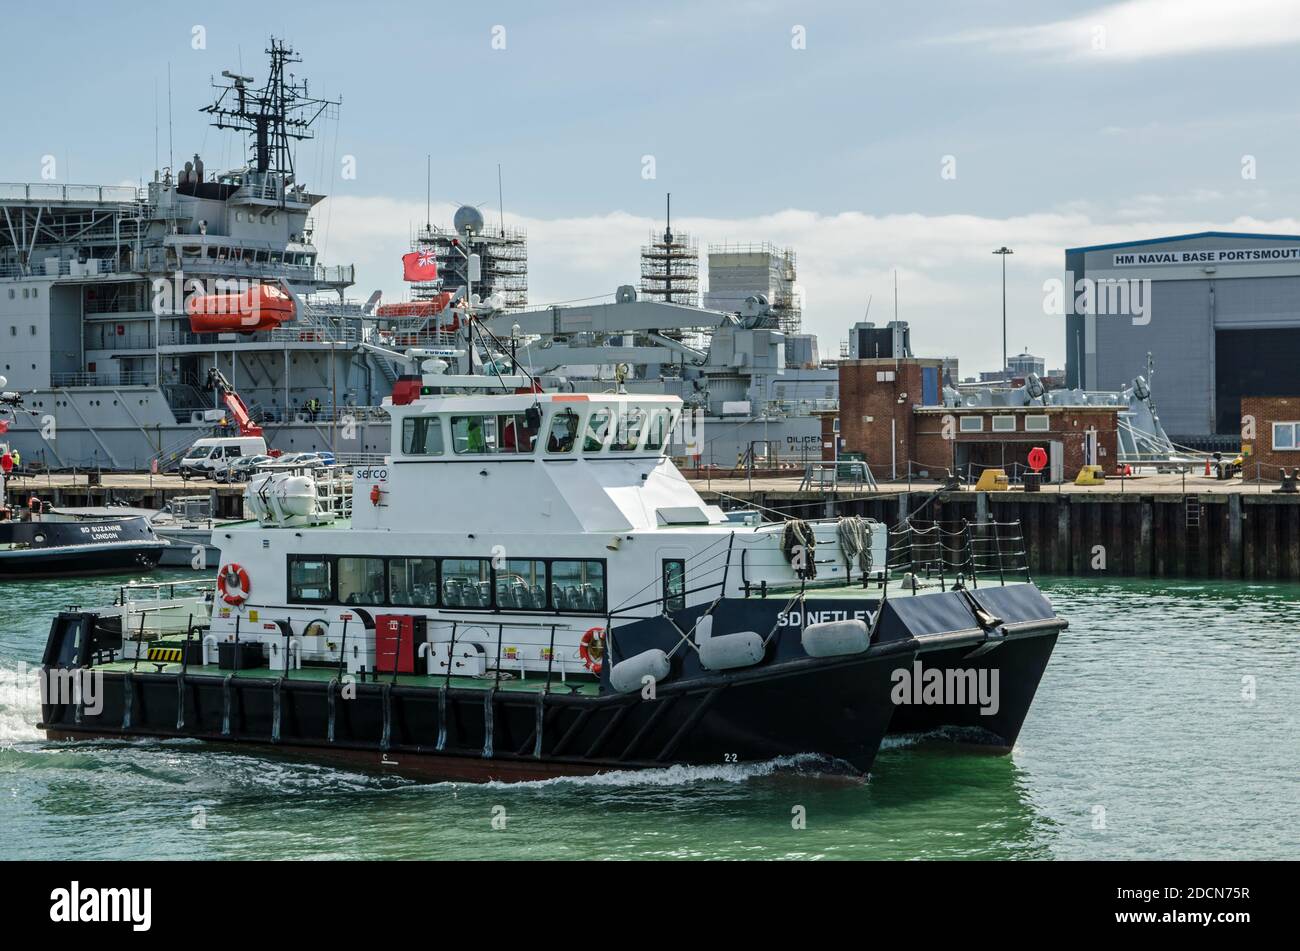 Portsmouth, UK - September 8, 2020: The passenger tender SD Netlet heading away from the quayside to pick up passengers from one of the Royal Navy shi Stock Photo